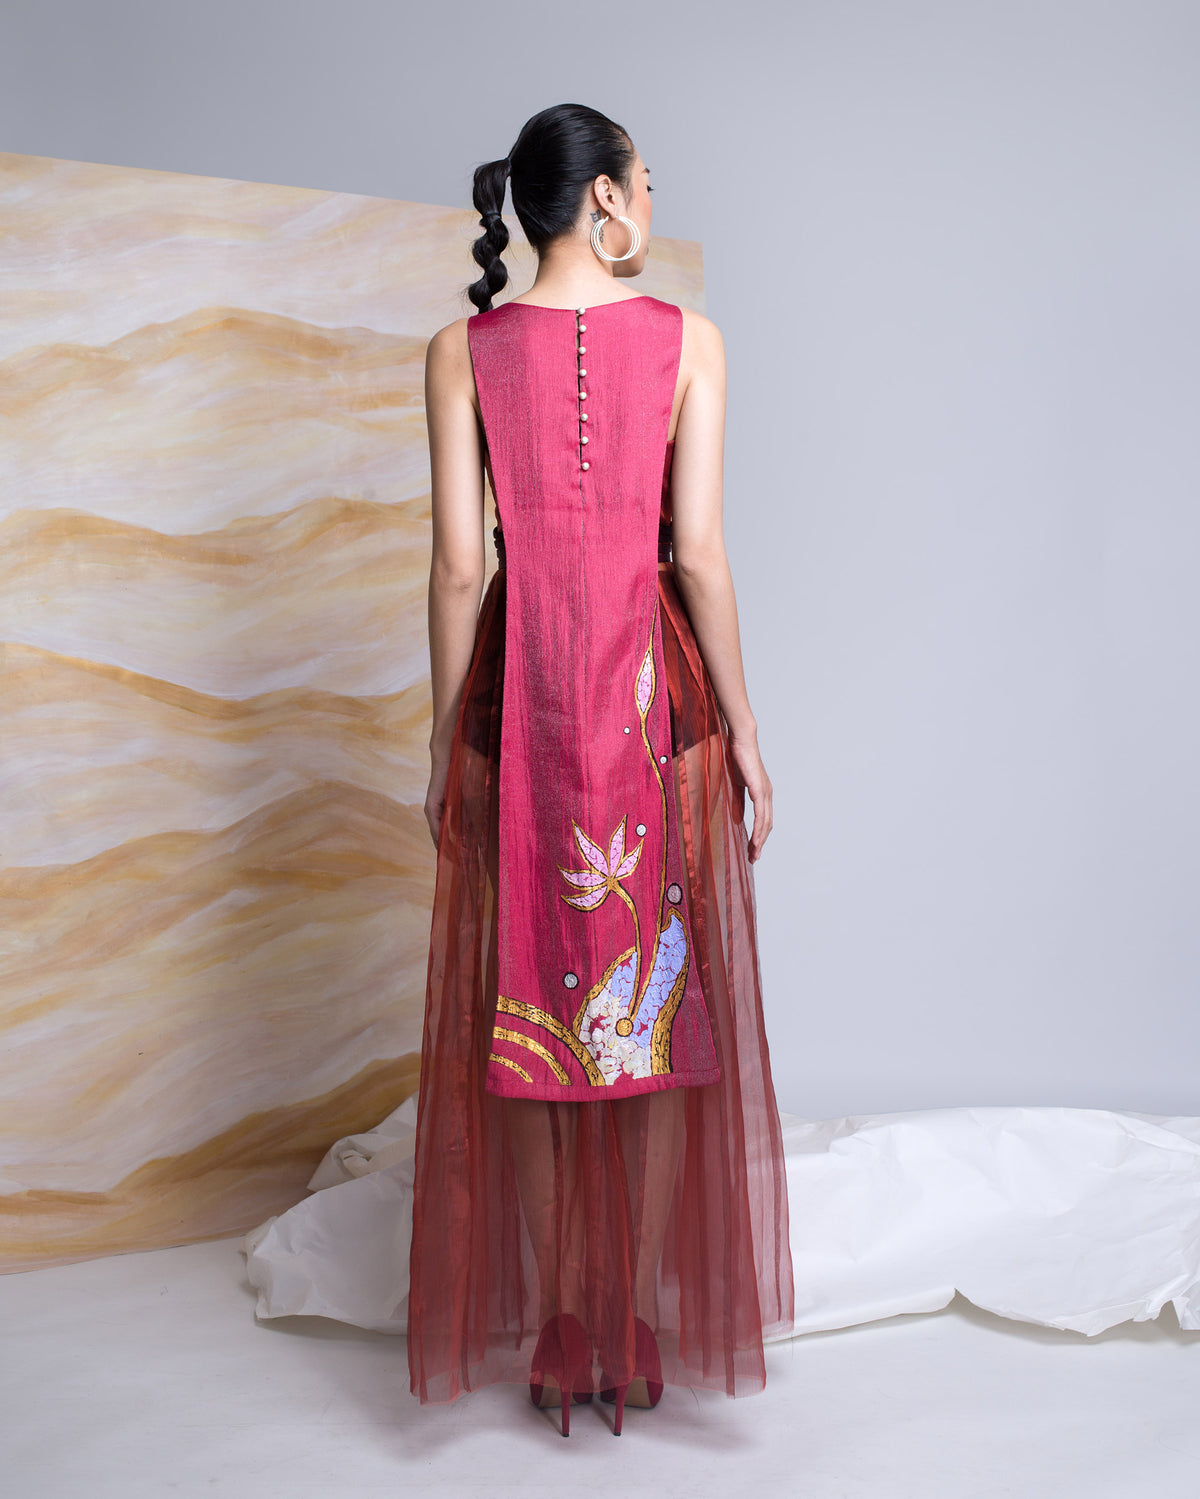 Floral Surrealism-painted Gown Dress